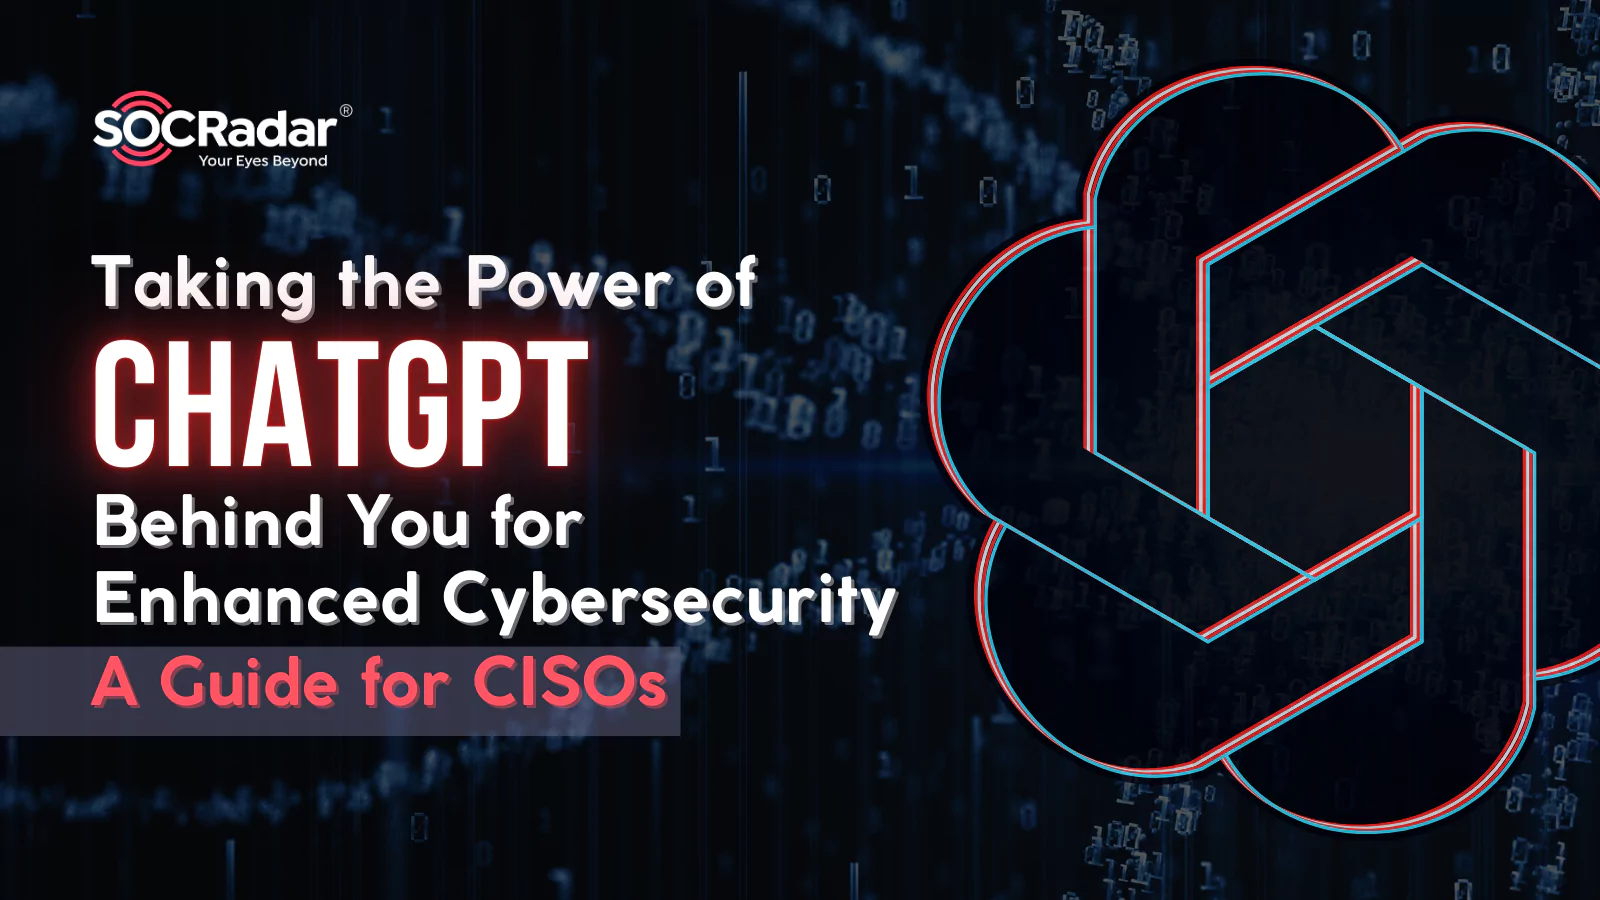 SOCRadar® Cyber Intelligence Inc. | Taking the Power of ChatGPT Behind You for Enhanced Cybersecurity: A Guide for CISOs